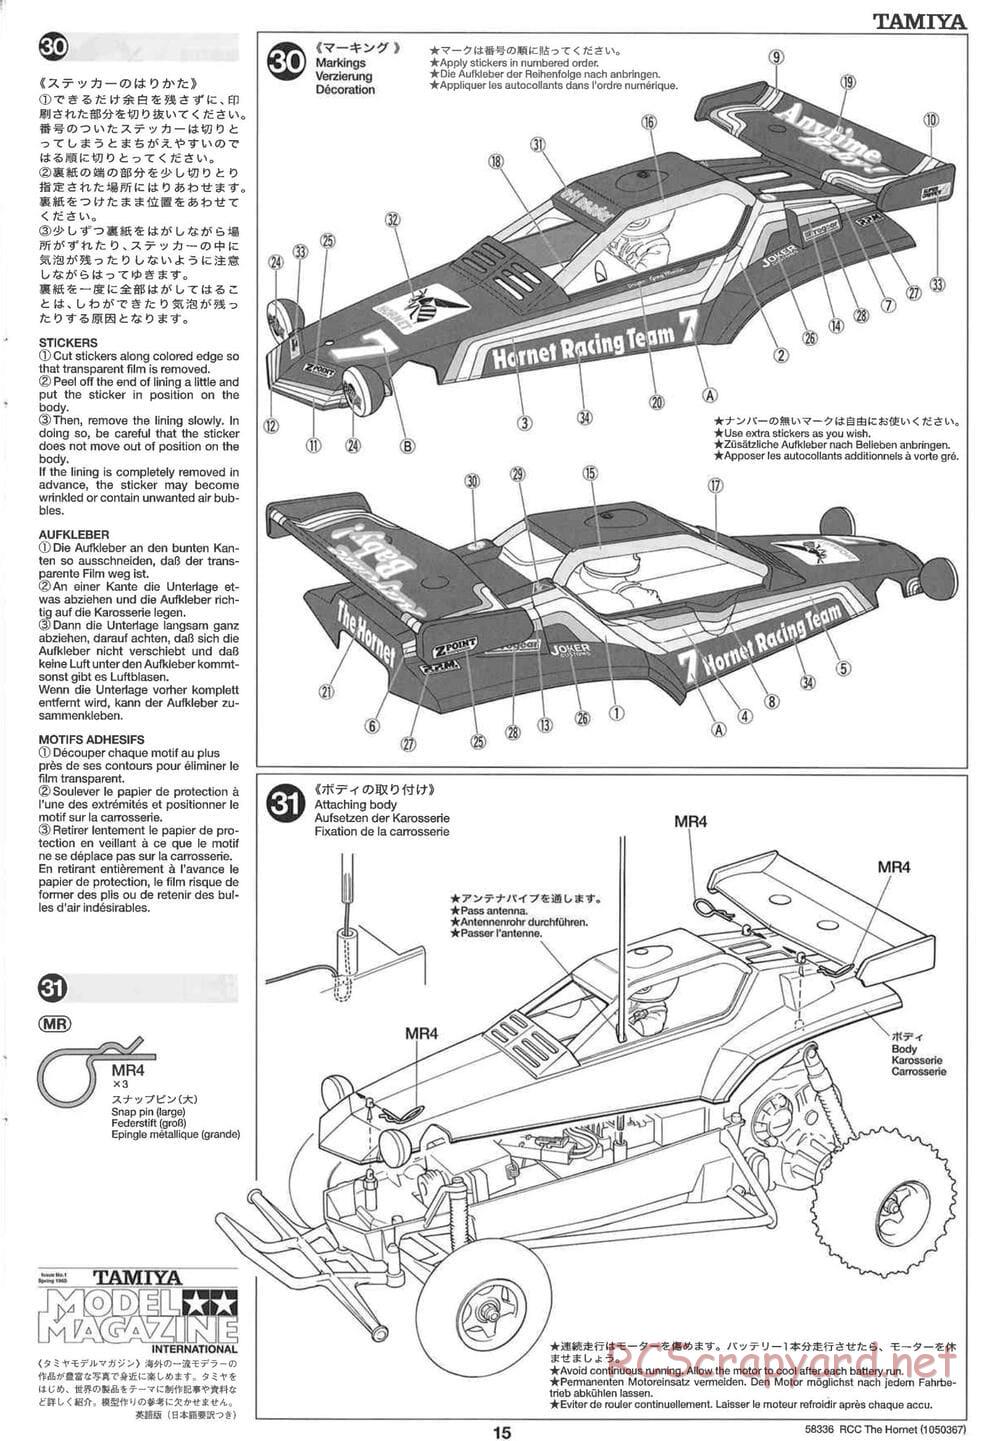 Tamiya - The Hornet (2004) - GH Chassis - Manual - Page 15